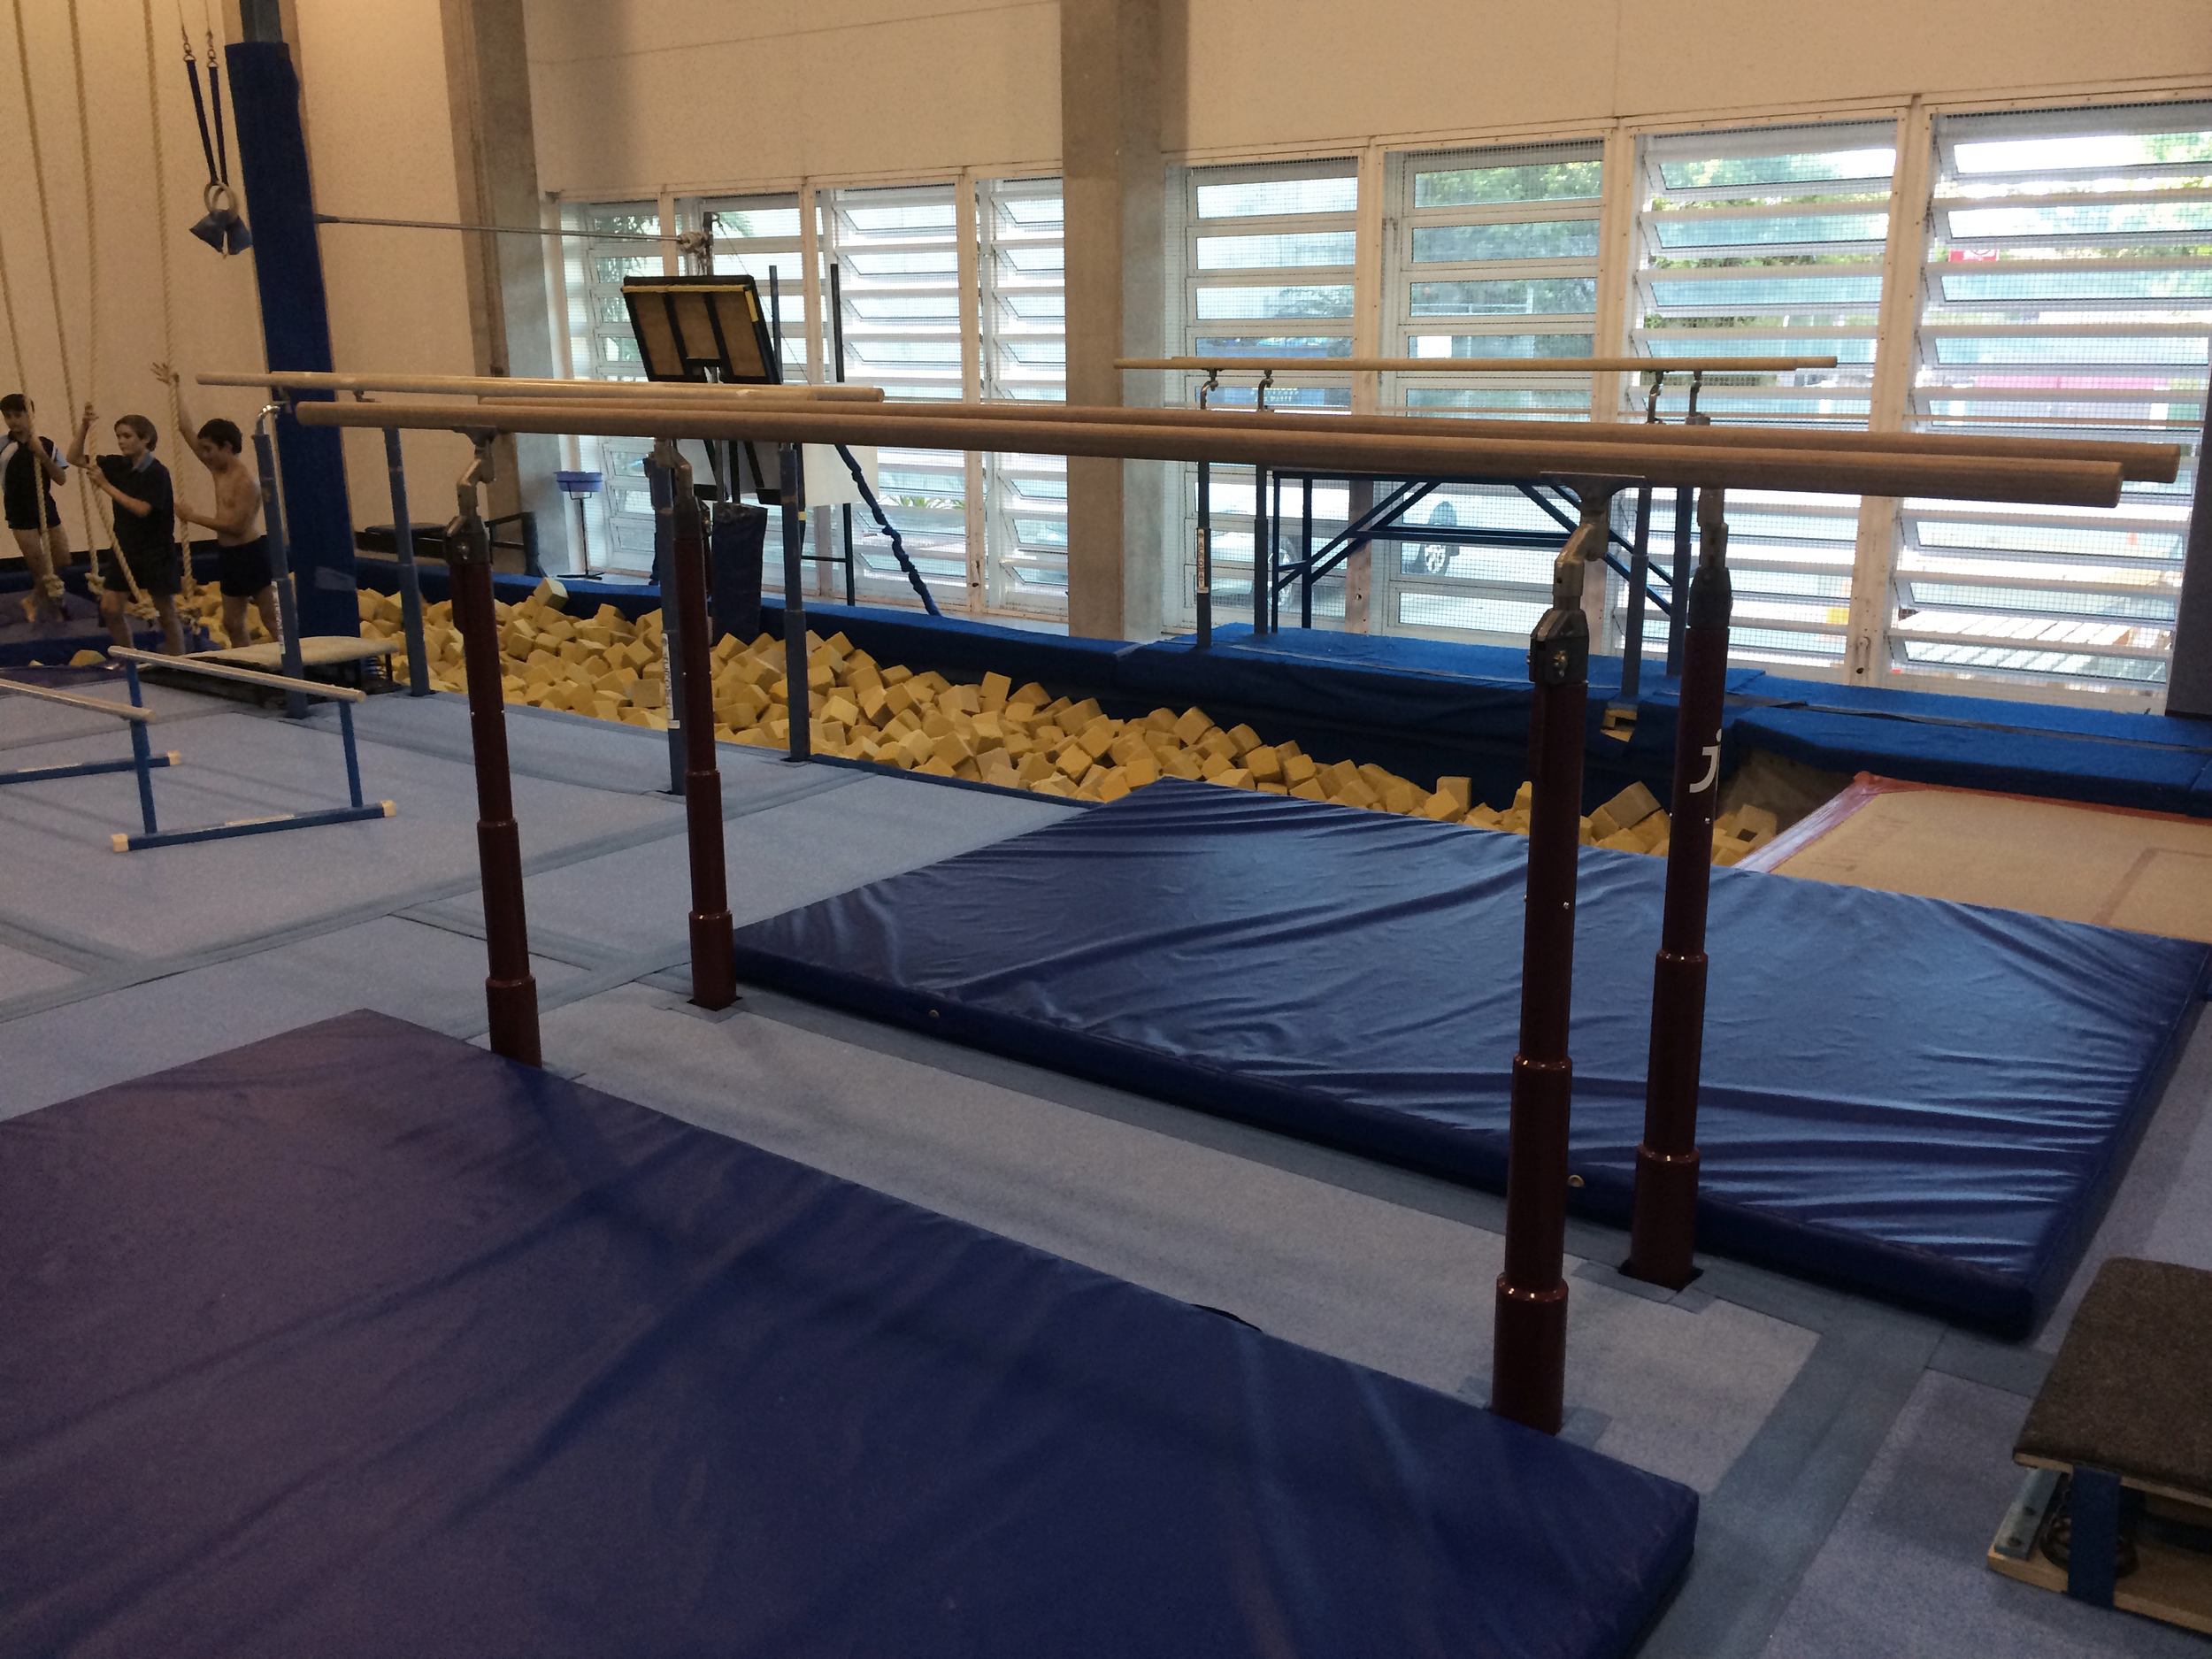 Parallel bars and pit